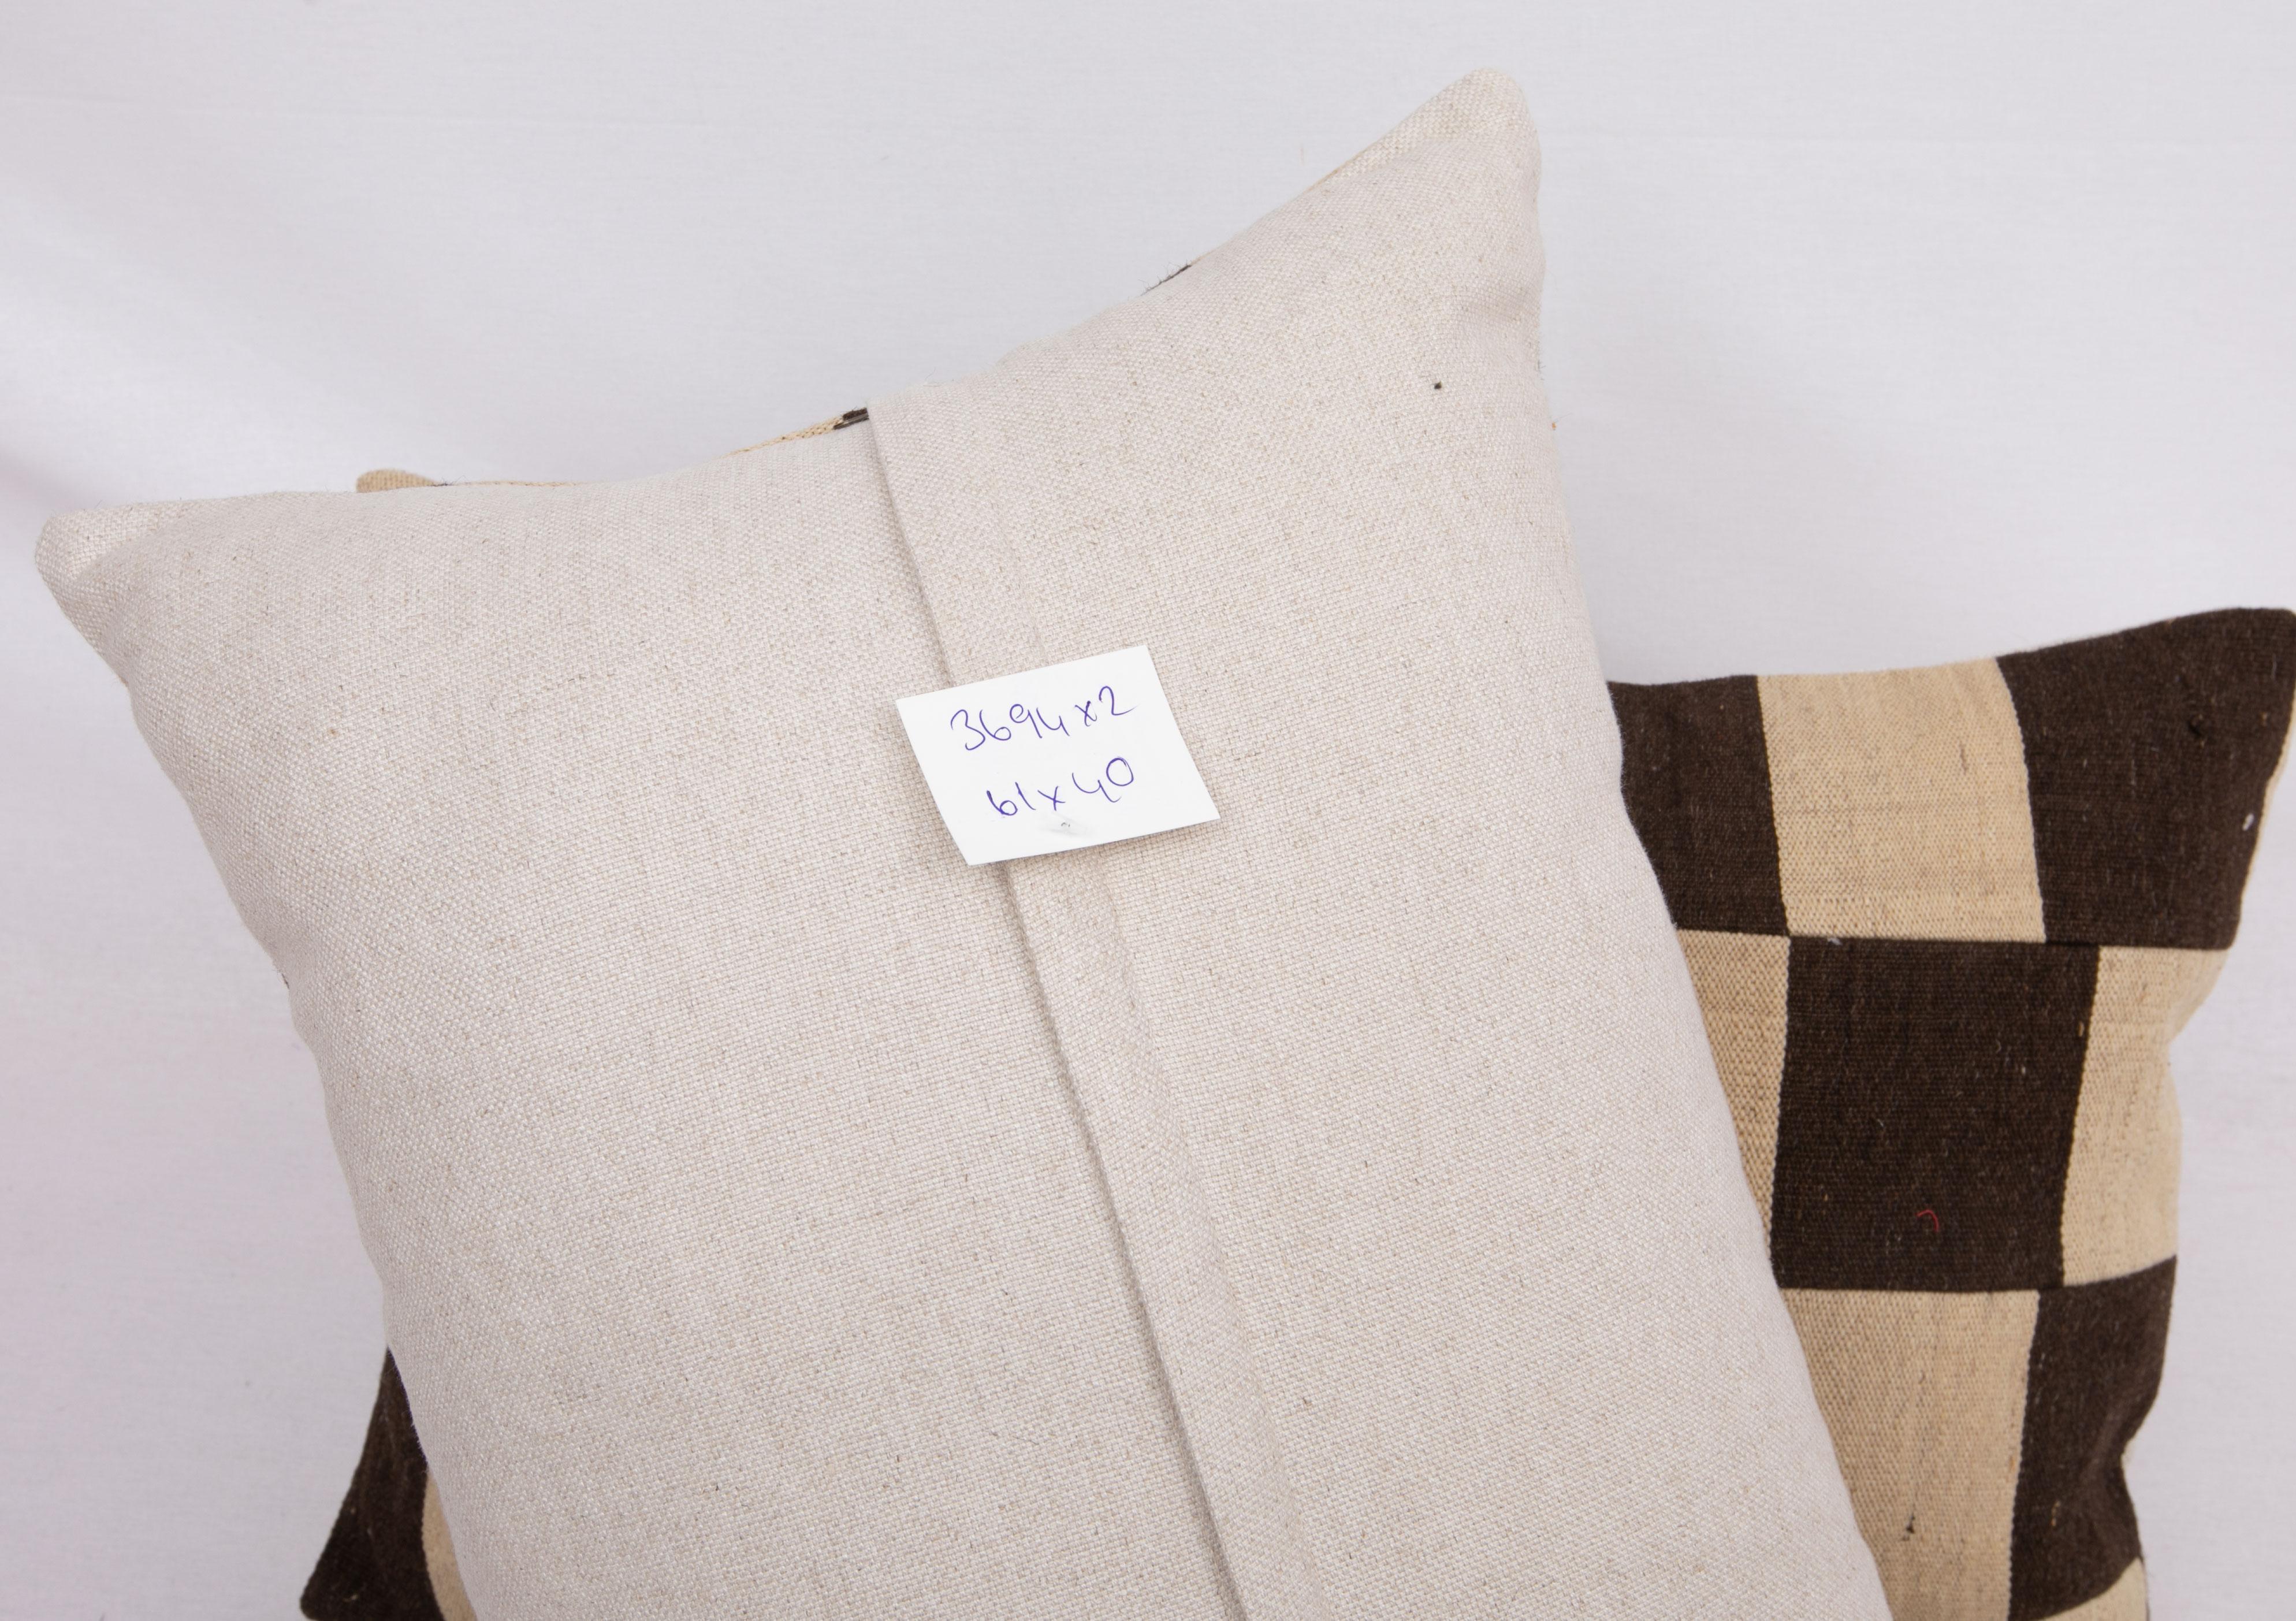 Hand-Woven Pillow Cases with Chequers Design Fashioned from a Mid 20th C Flat Weave